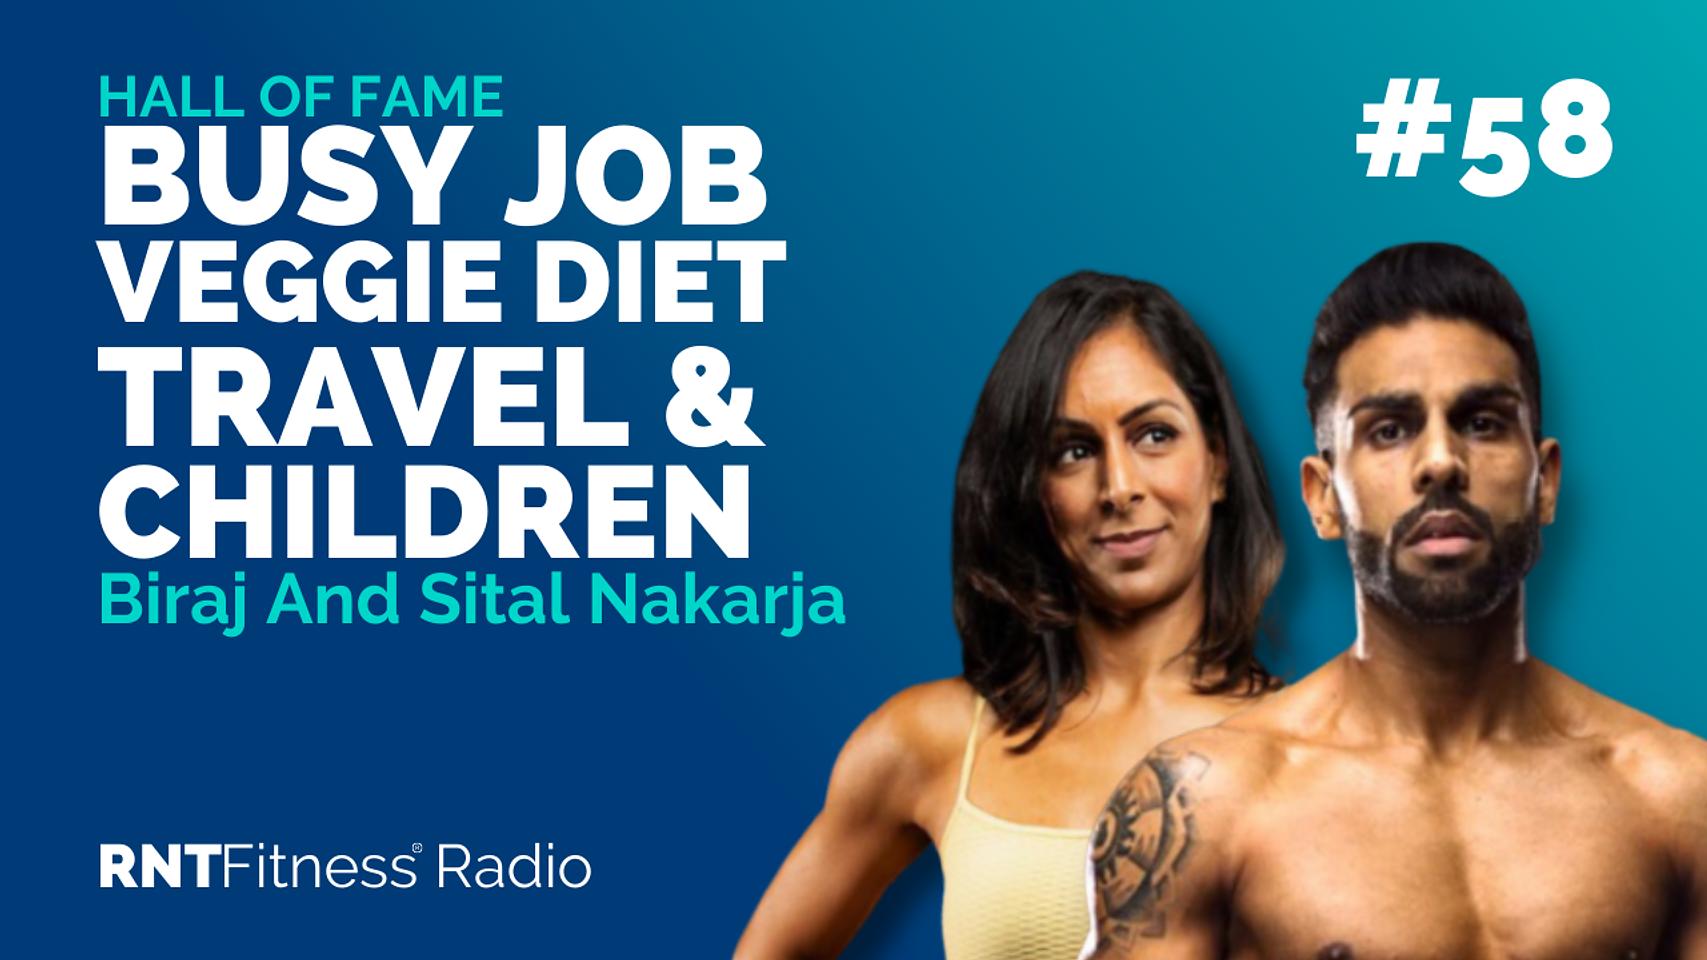 Ep. 58 - Hall of Fame | Biraj And Sital Nakarja - How To Transform Your Body With A Busy Job, Vegetarian Diet, Frequent Travel & Young Children